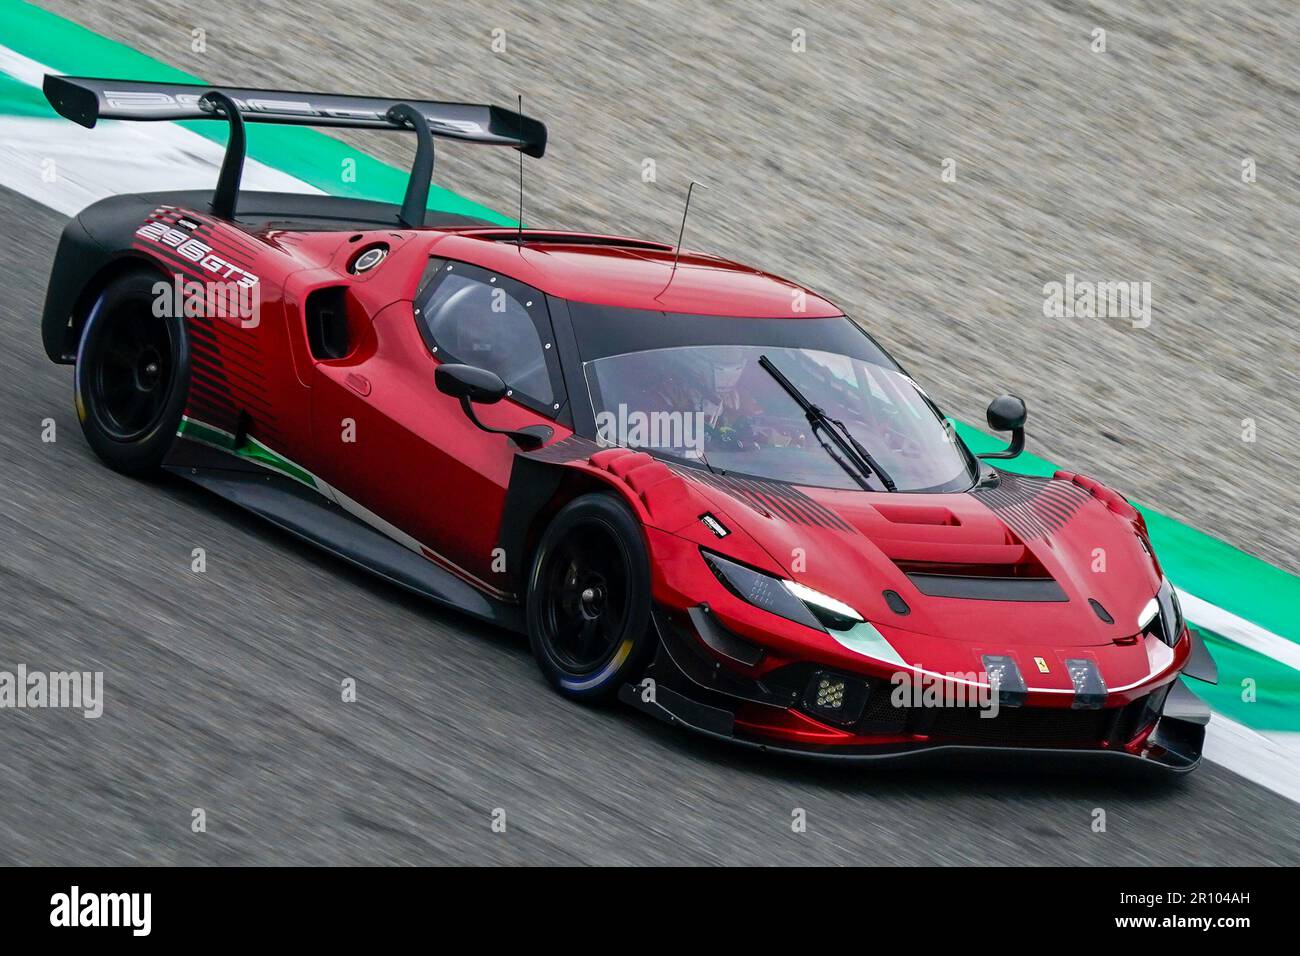 Monza, Italy. 10th May, 2023. Ferrari 296 GT3 during the World Endurance Championship test day on May 10th, 2023 in Autodromo Nazionale Monza, Italy Photo Alessio Morgese / E-Mage Credit: Alessio Morgese/Alamy Live News Stock Photo